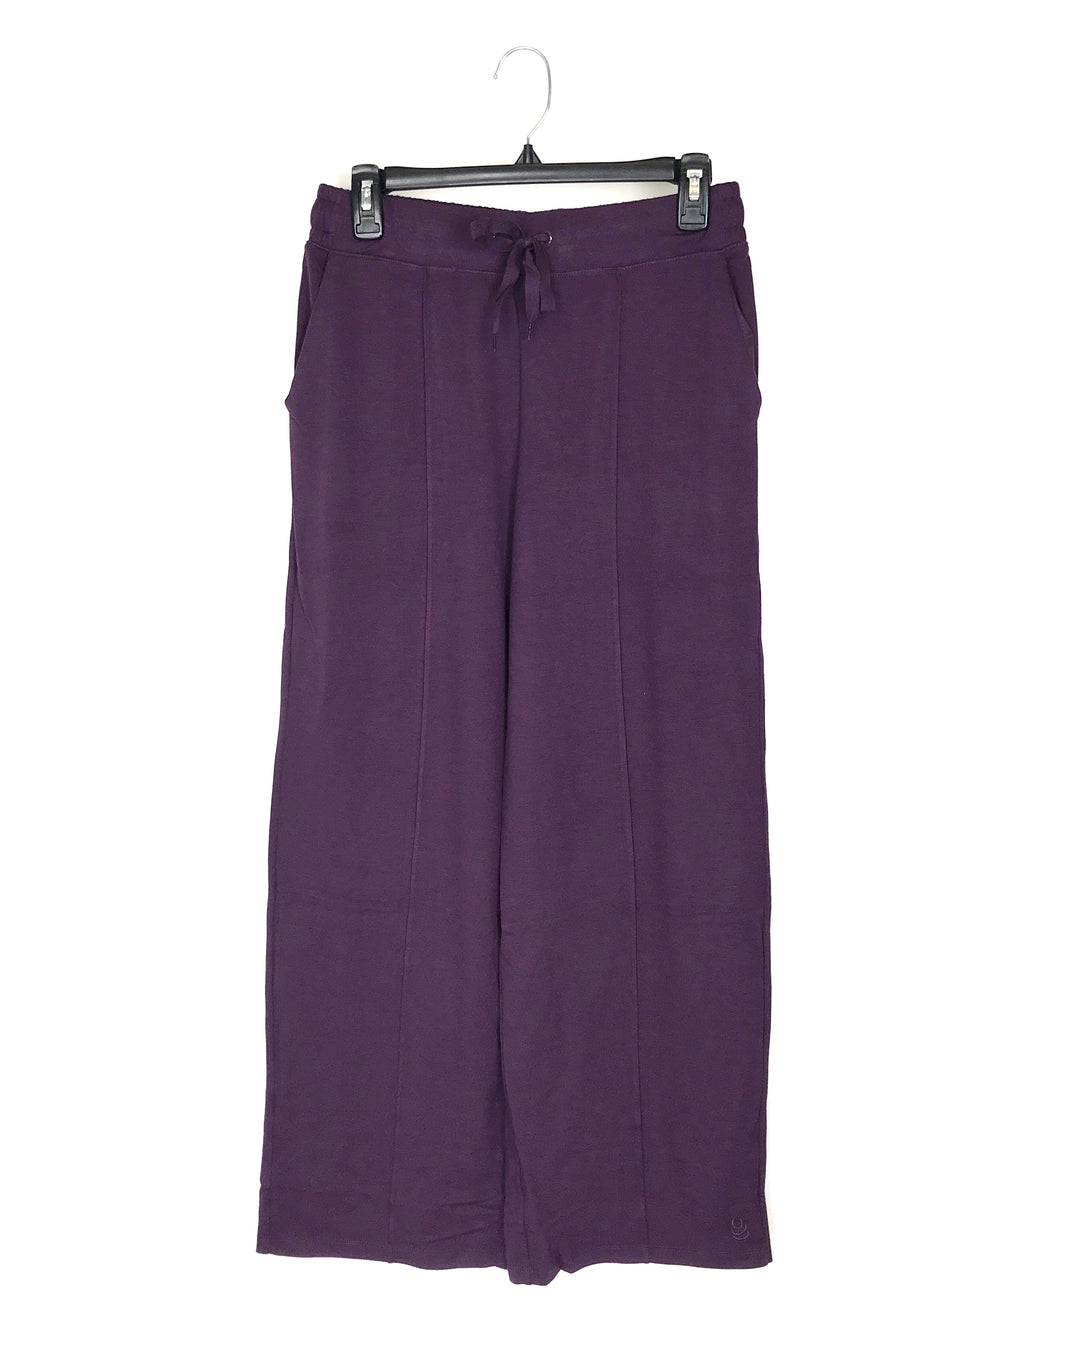 Purple Sweat Pants - Extra Small and Small